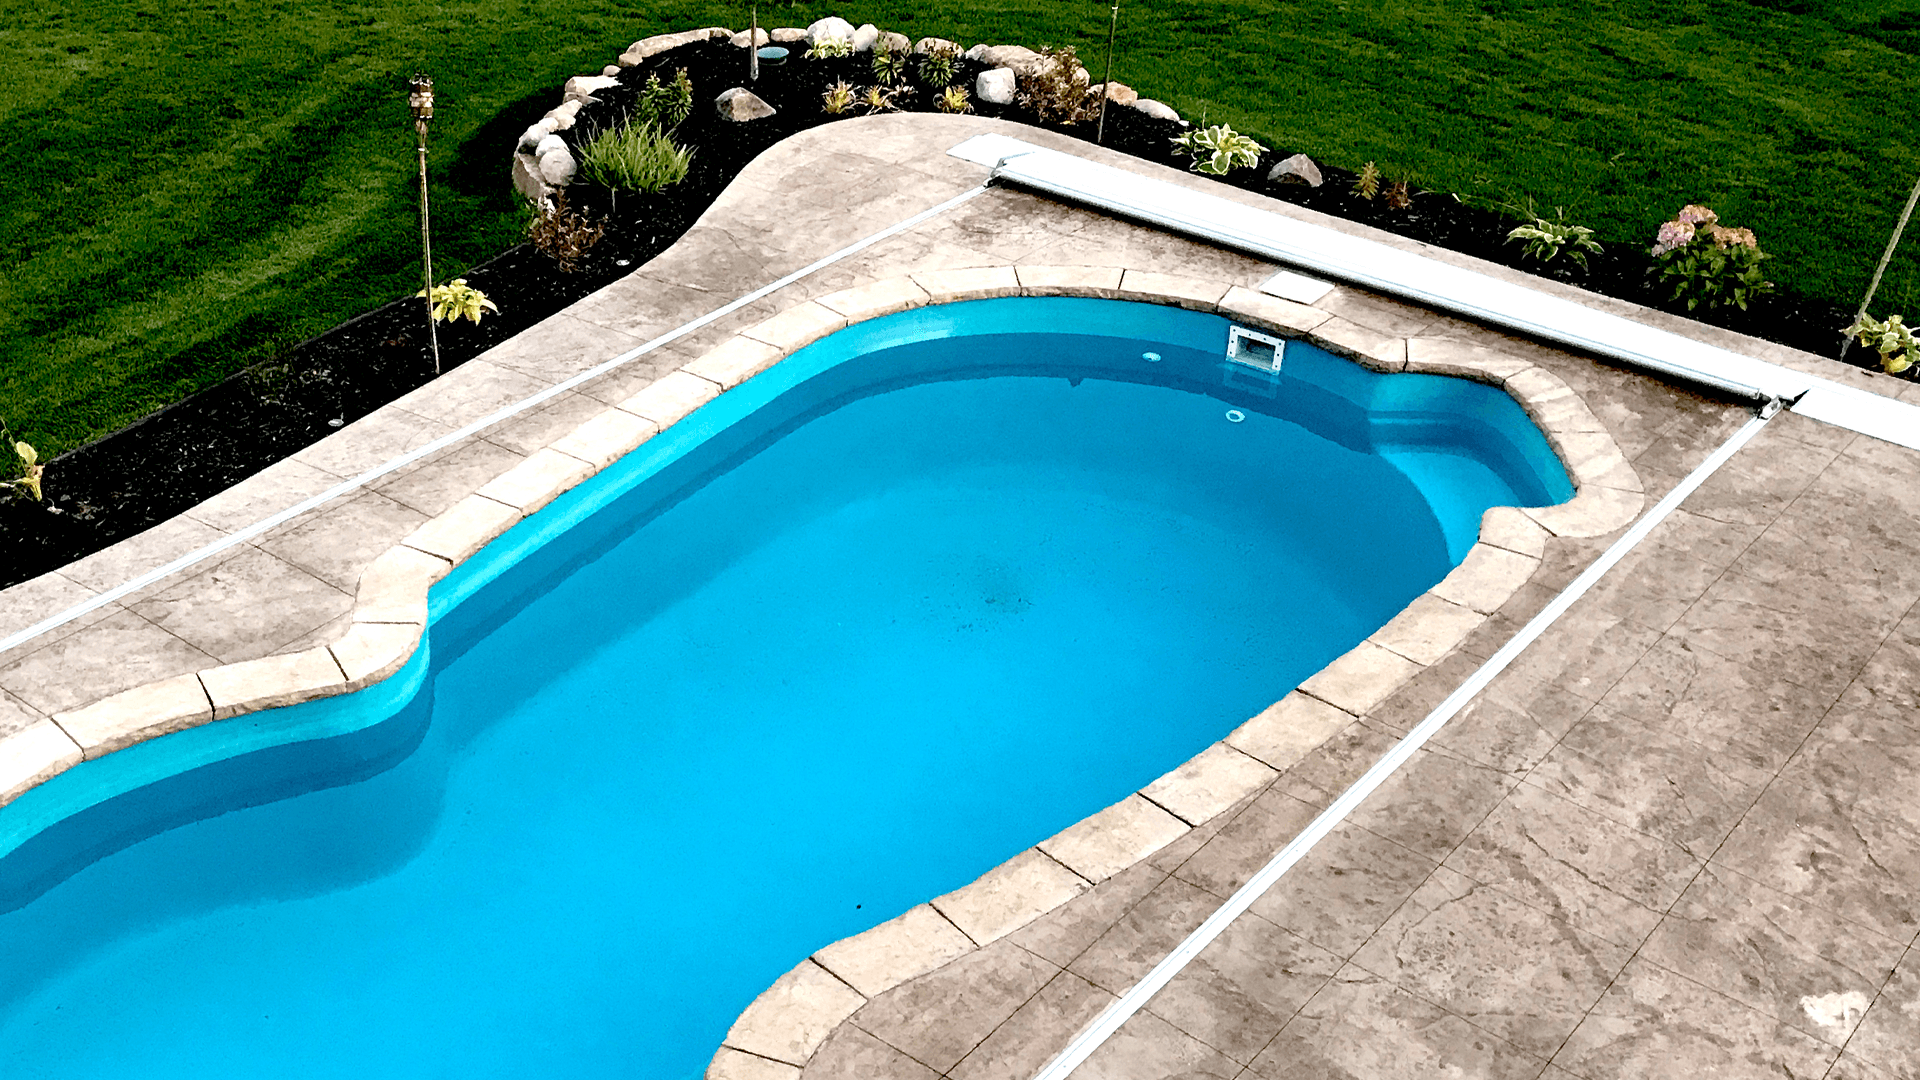 Automatic Pool Covers are not Winter Covers - The Pool Blog